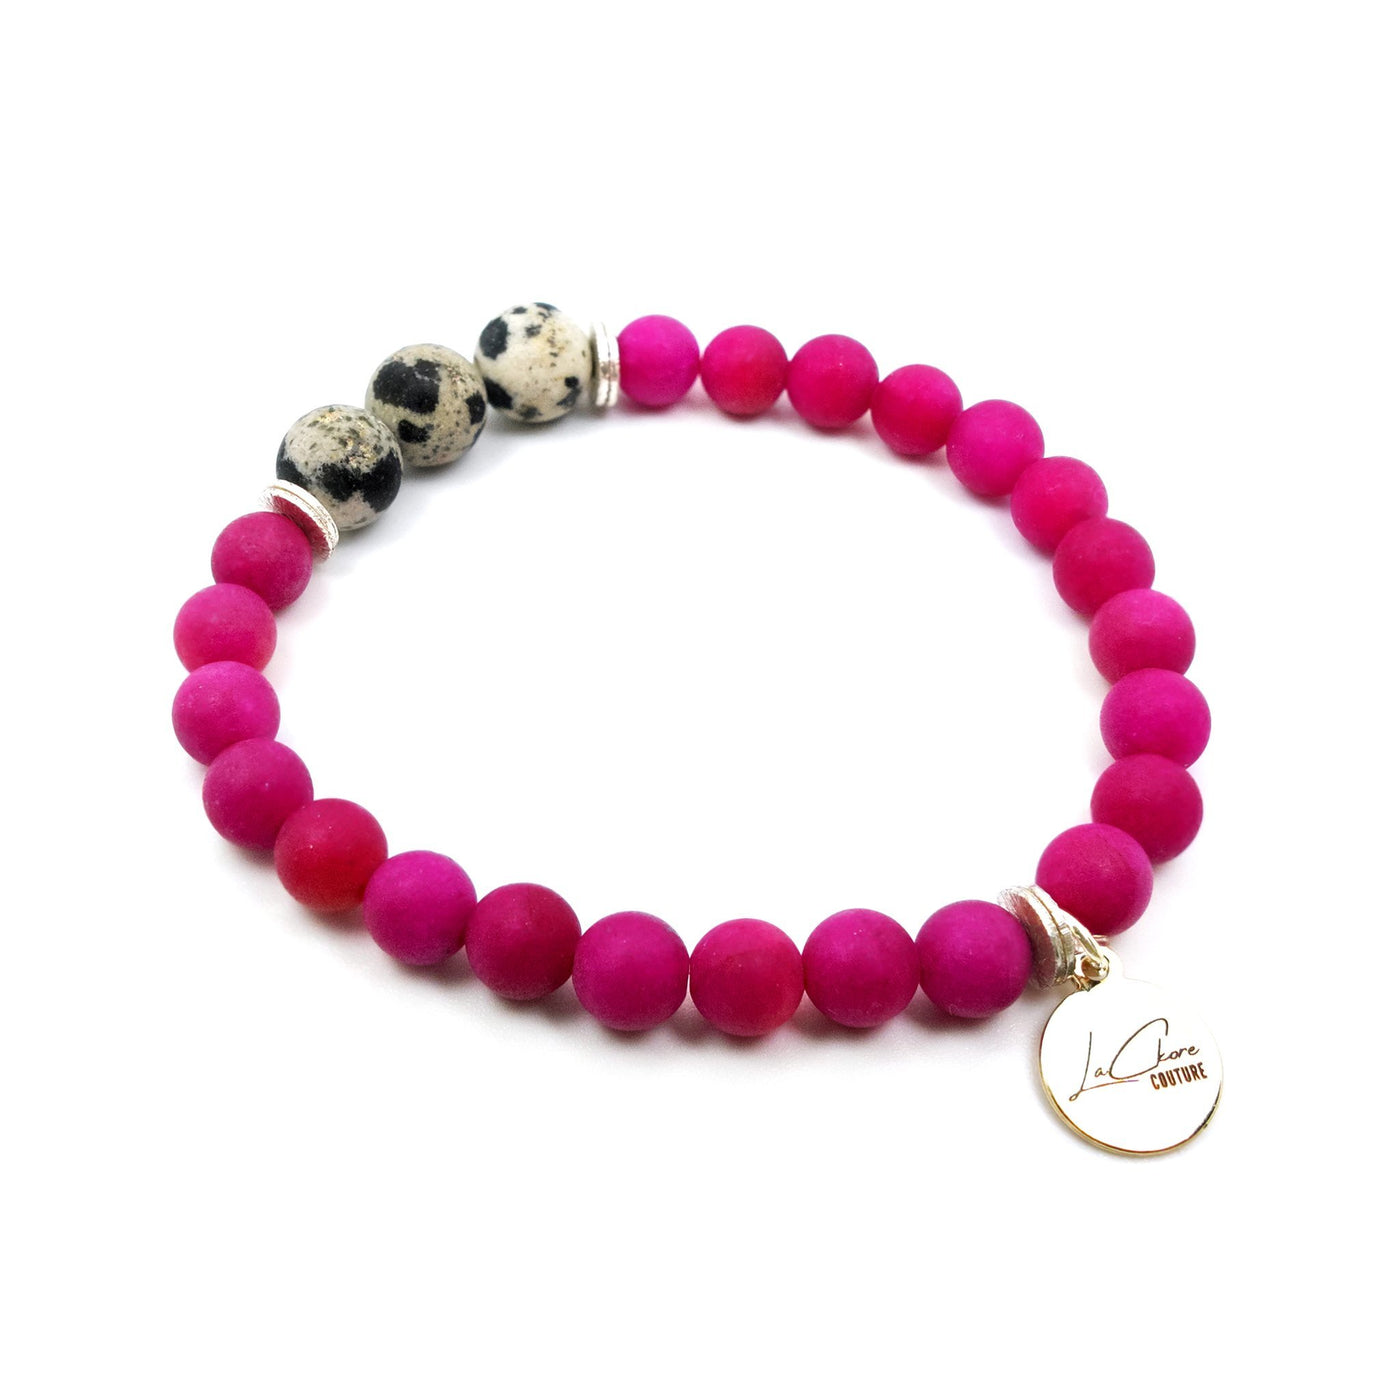 Girls Night Out Bracelet LaCkore Couture